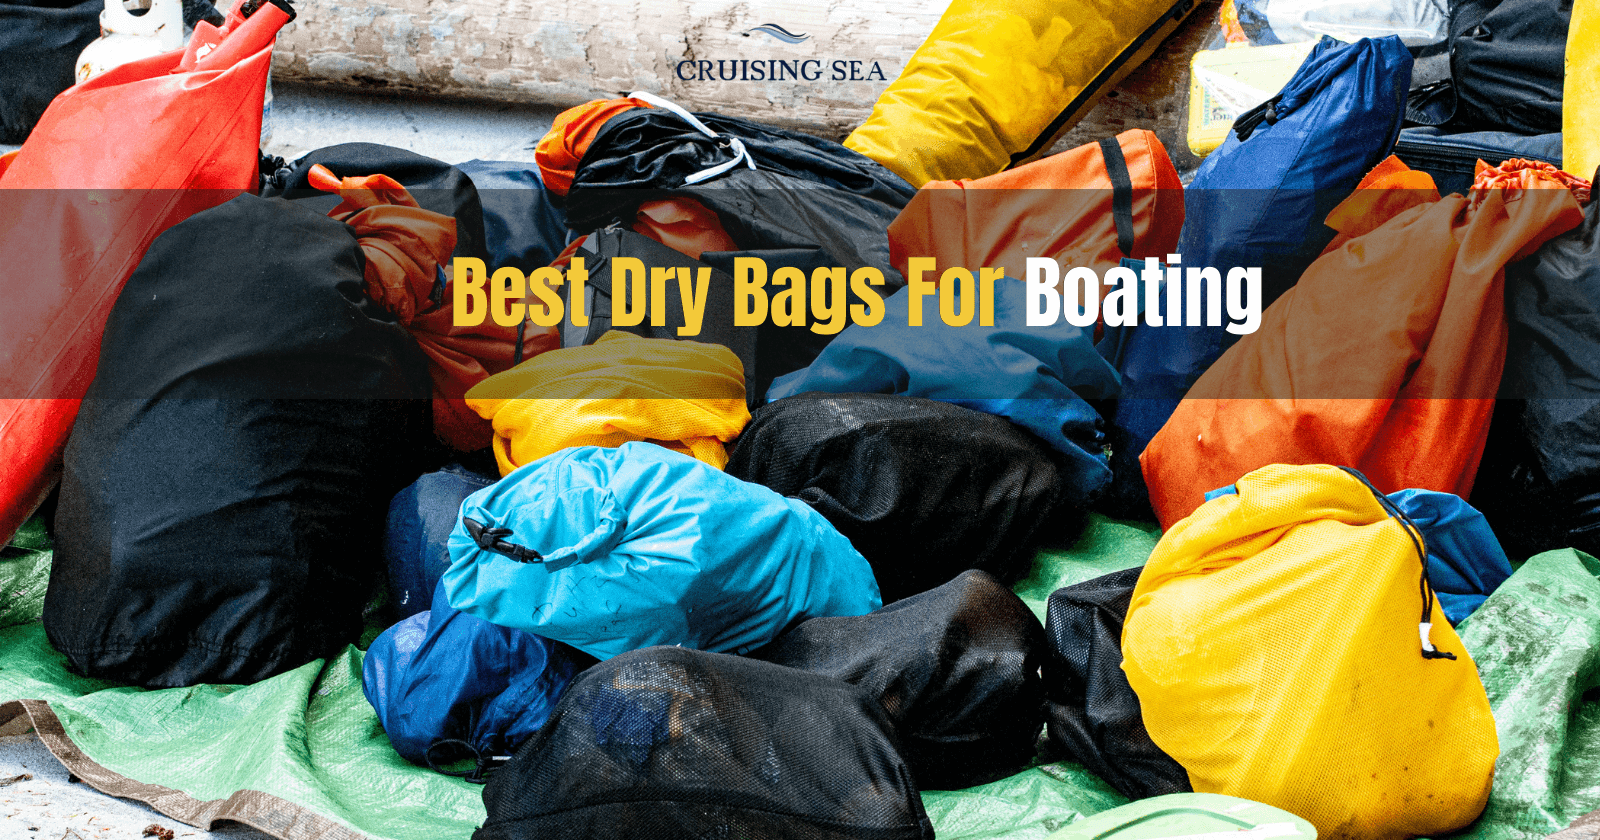 New Dry Bag Waterproof Floating and Lightweight Bags for Kayaking Boating 